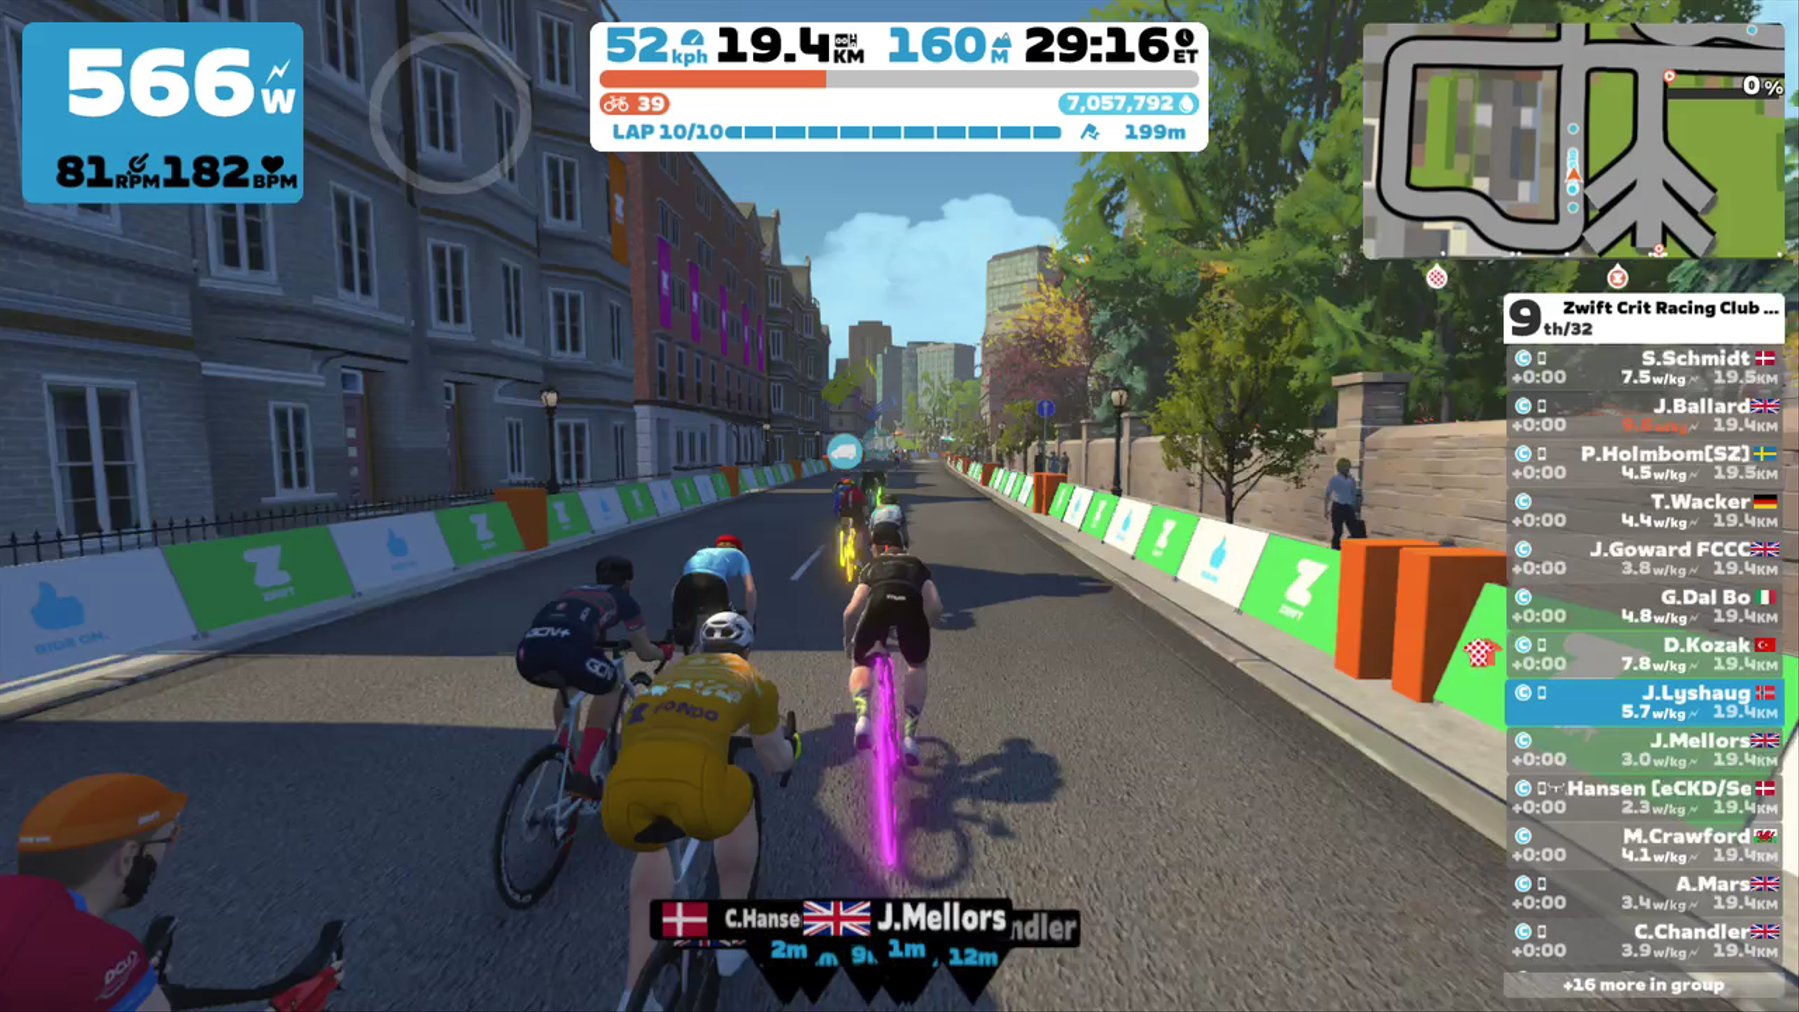 Zwift - Race: Zwift Crit Racing Club - The Bell Lap (C) on The Bell Lap in Crit City